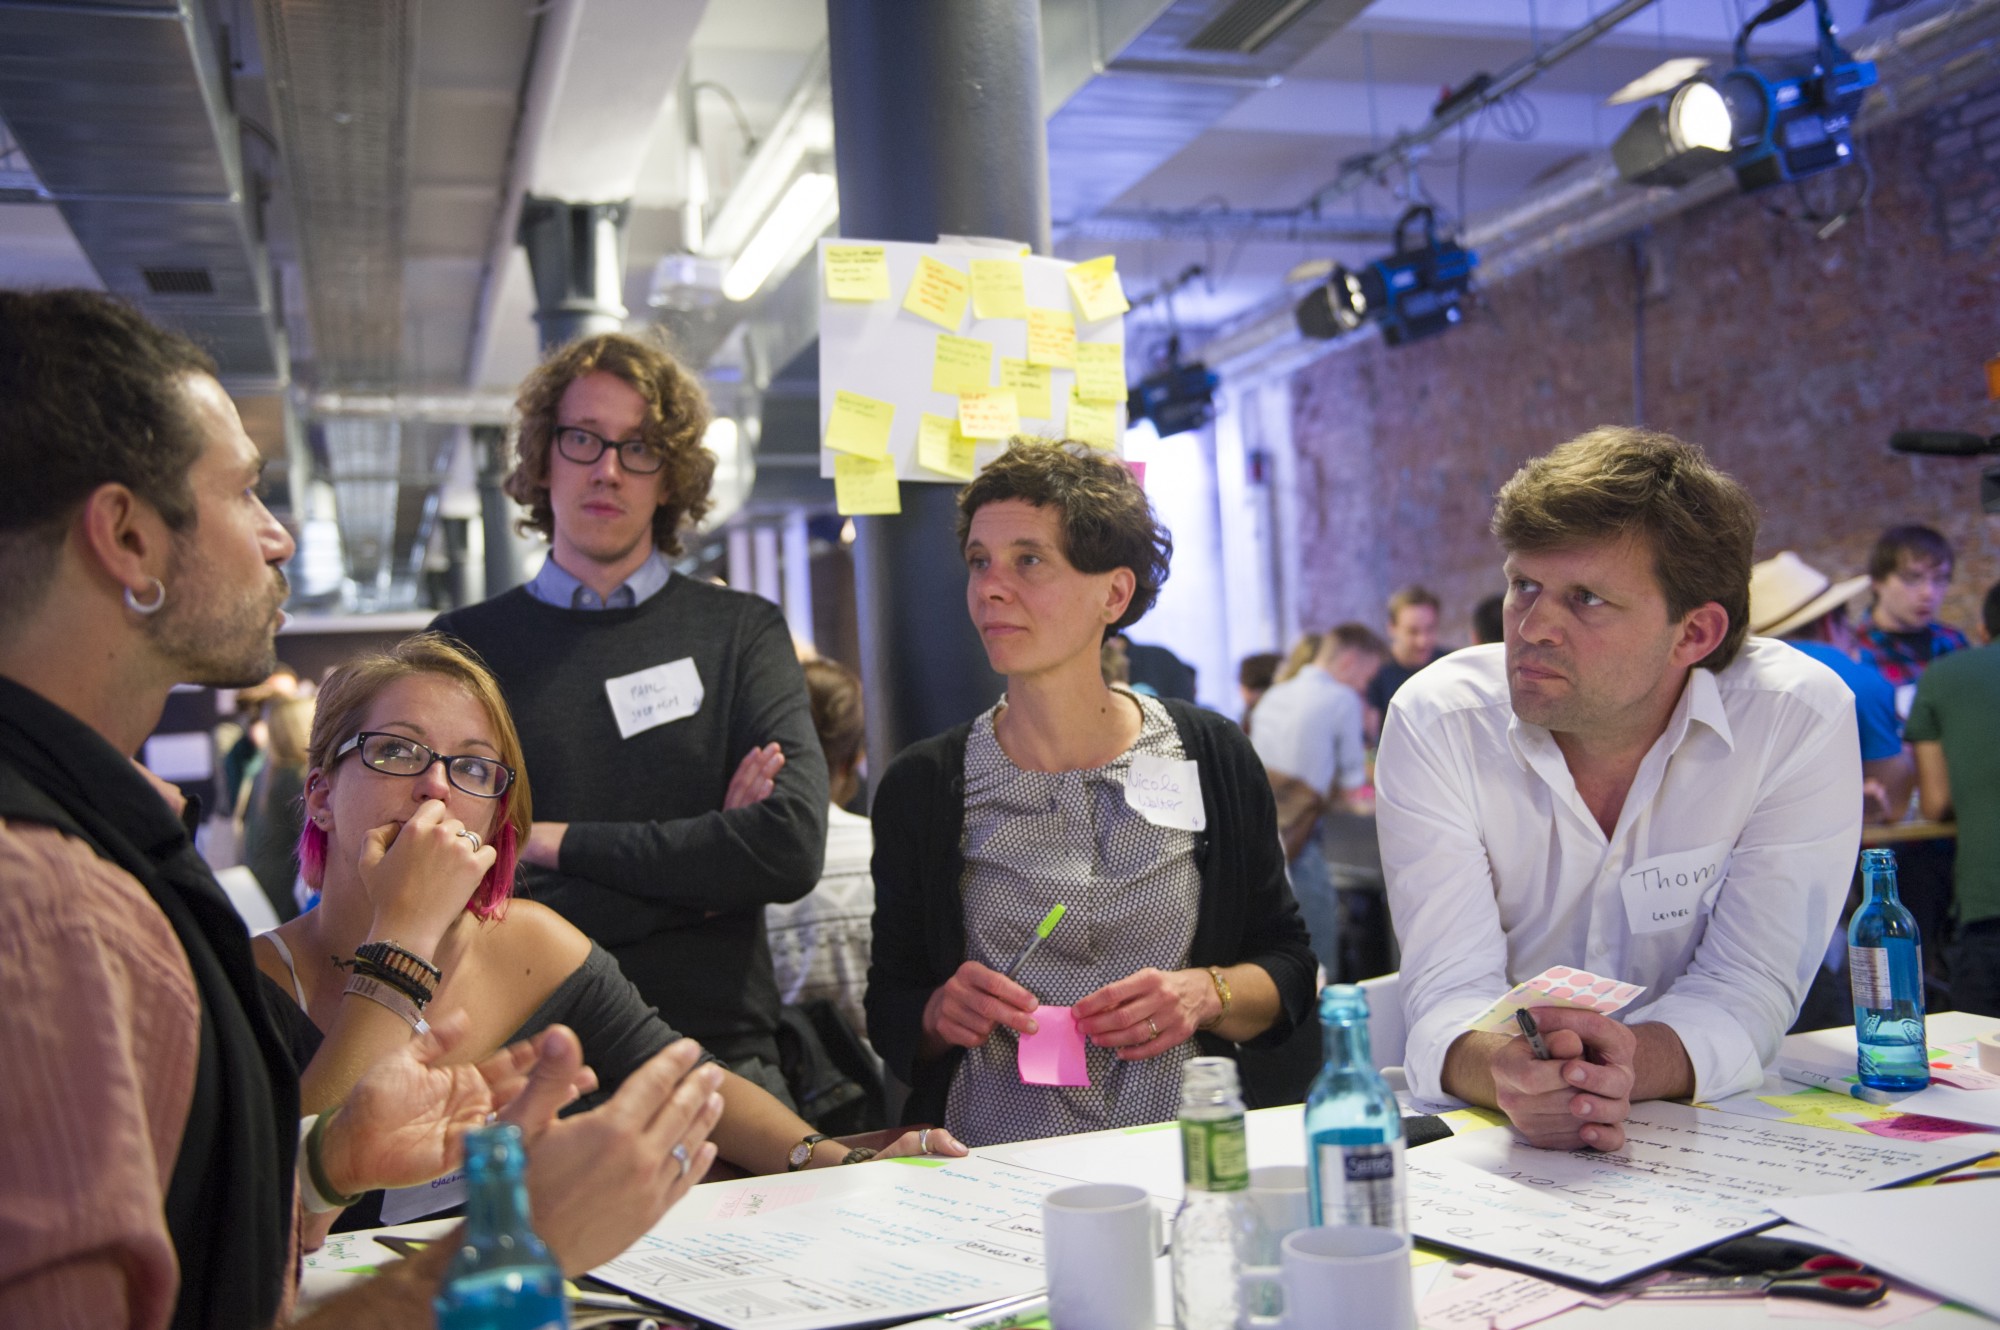 Participants use design thinking to develop new news-media product ideas at Connect Berlin. Credit: Steffi Loos